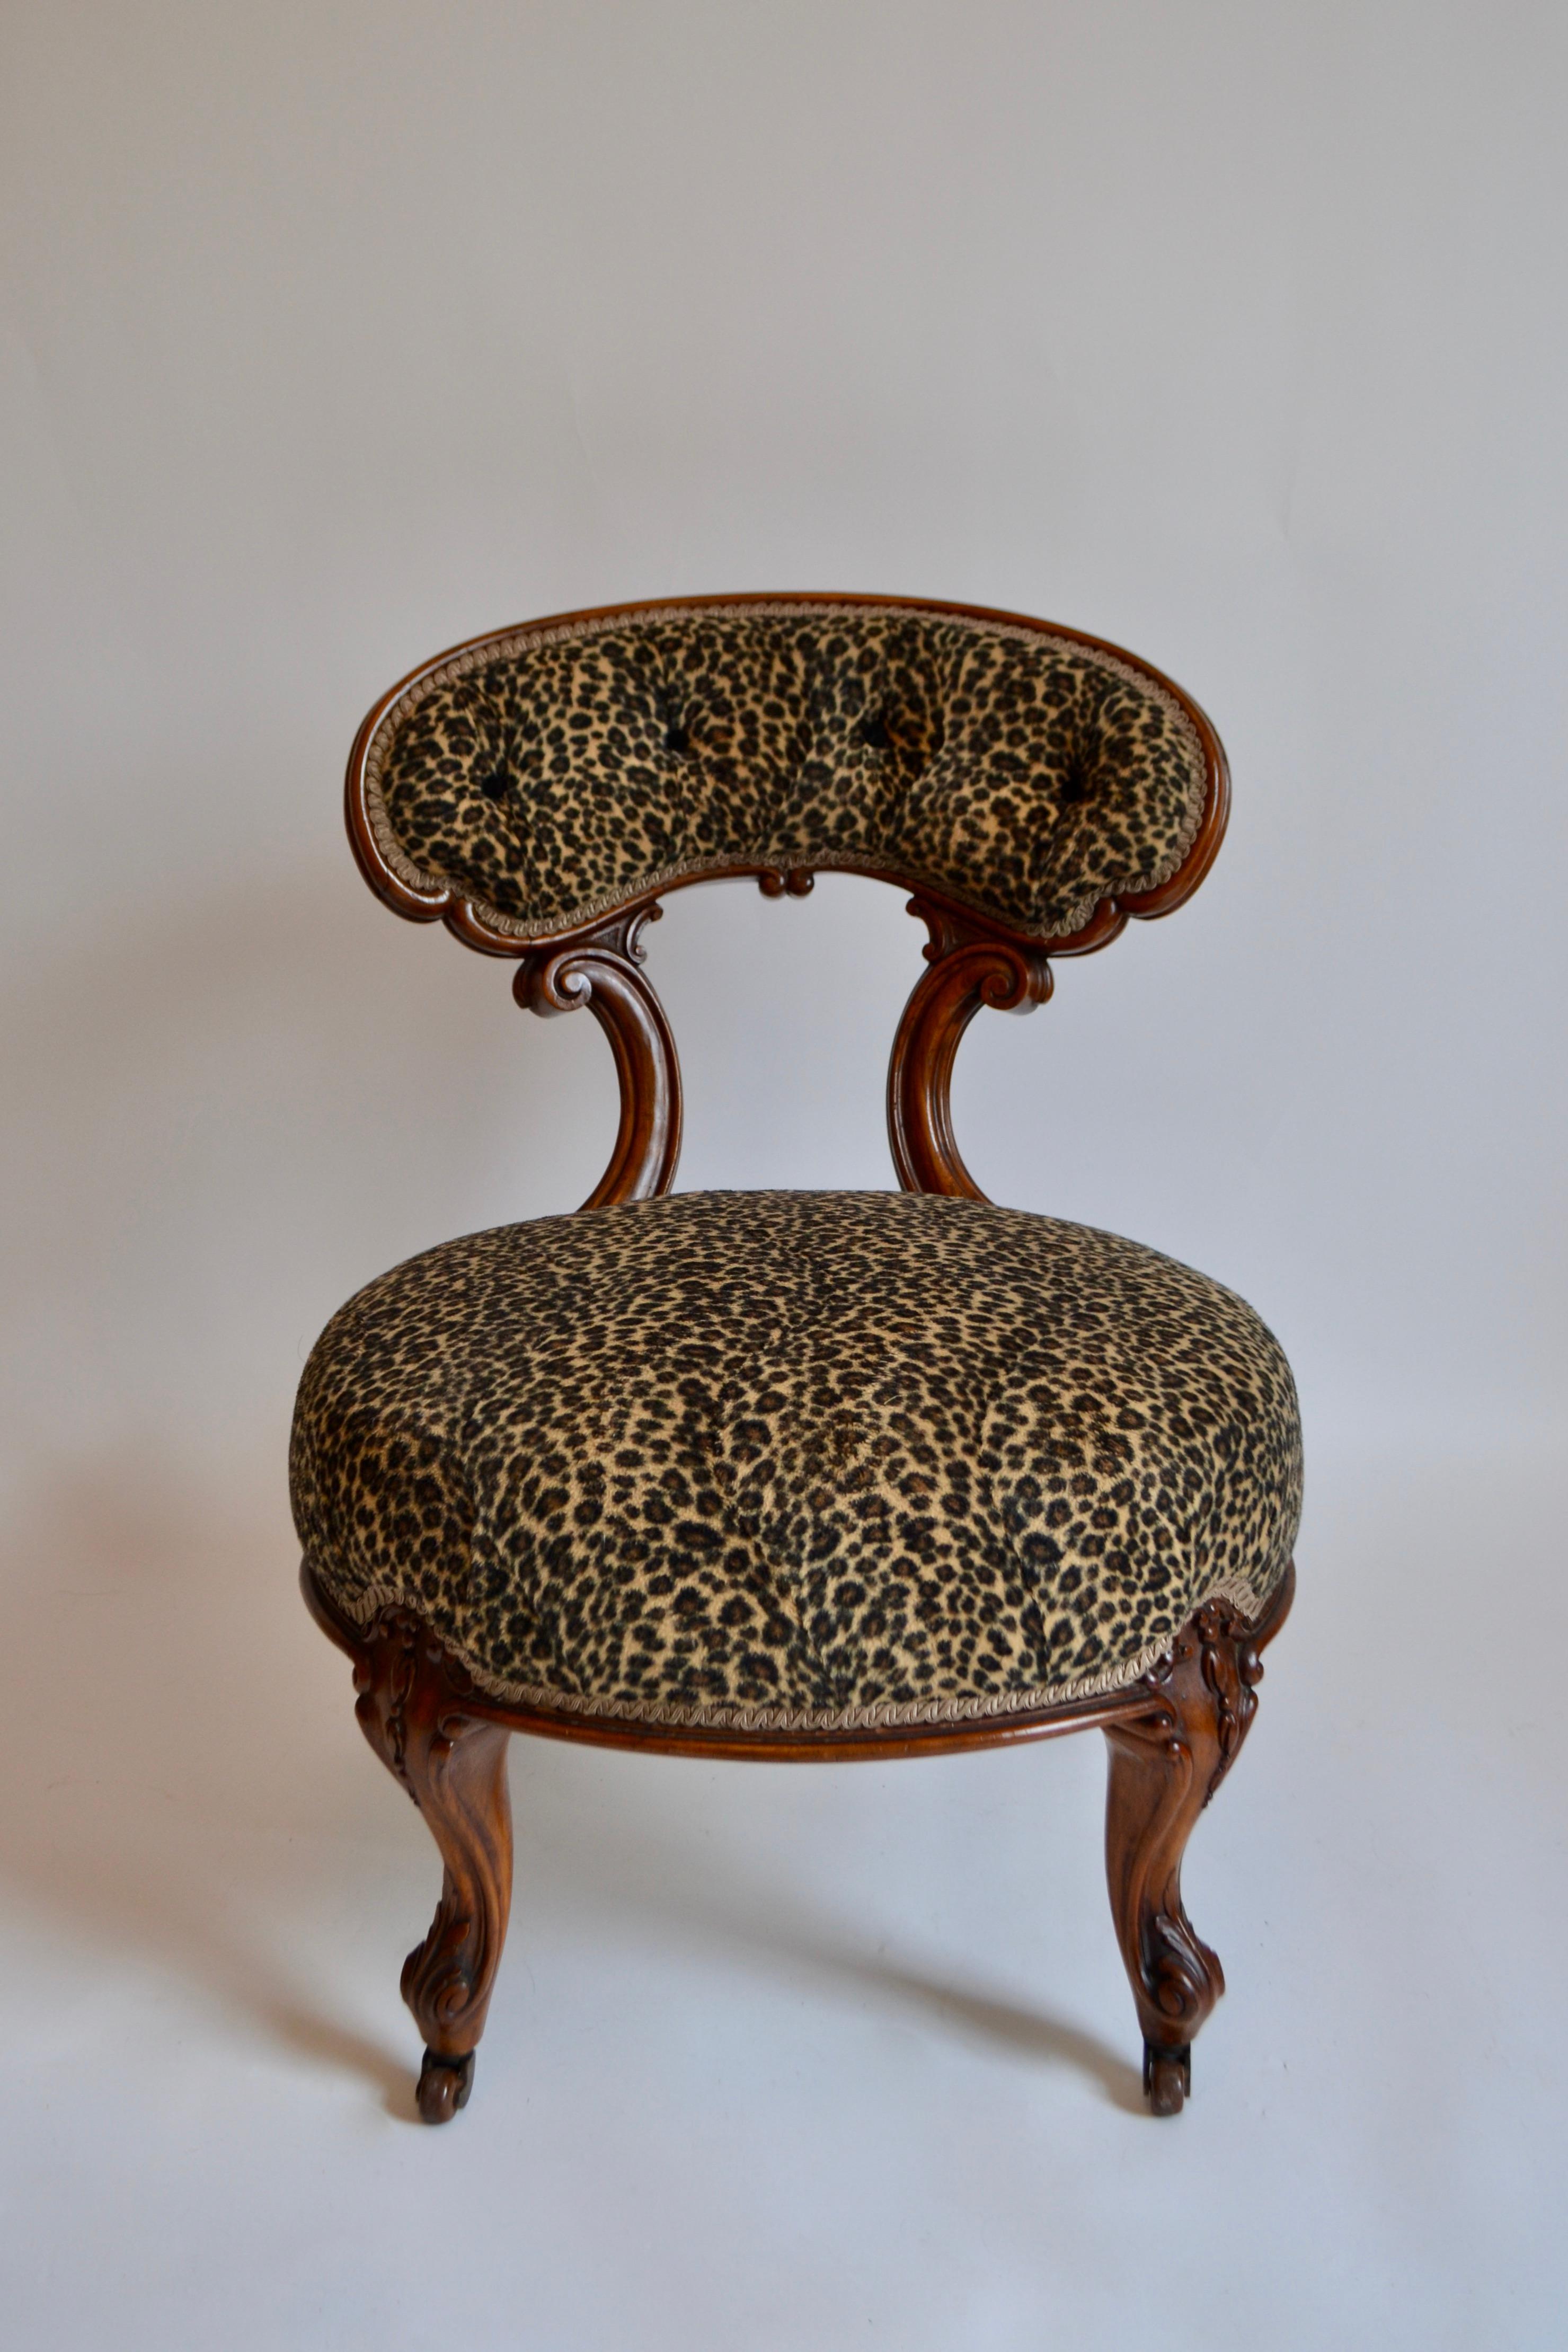 Fabric Pair of Victorian Walnut Chairs Upholstered in Faux Leopard Skin, 19th Century